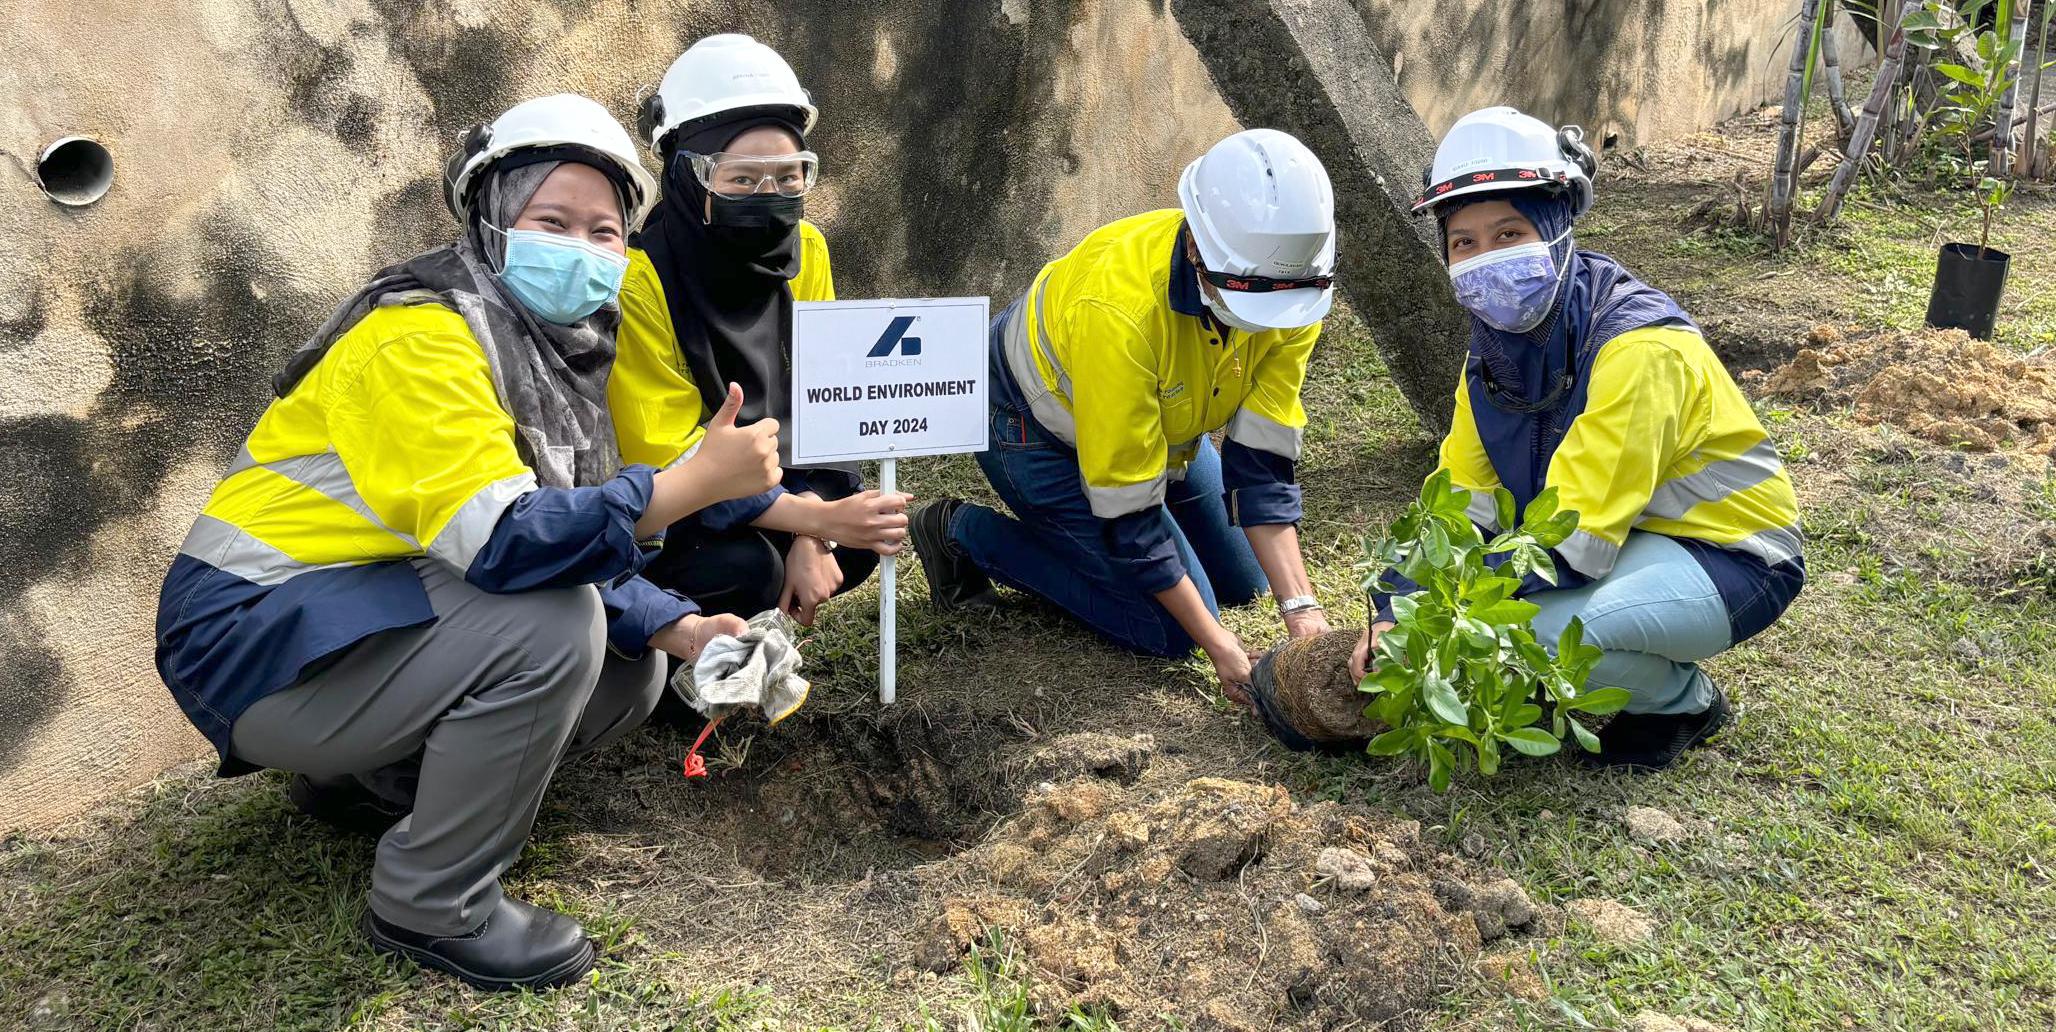 Four Bradken employees are crouched to the ground planting a small tree, one holds a sign that says "World Environment Day 2024". They wear yellow hi-vis uniforms and white hard hats.